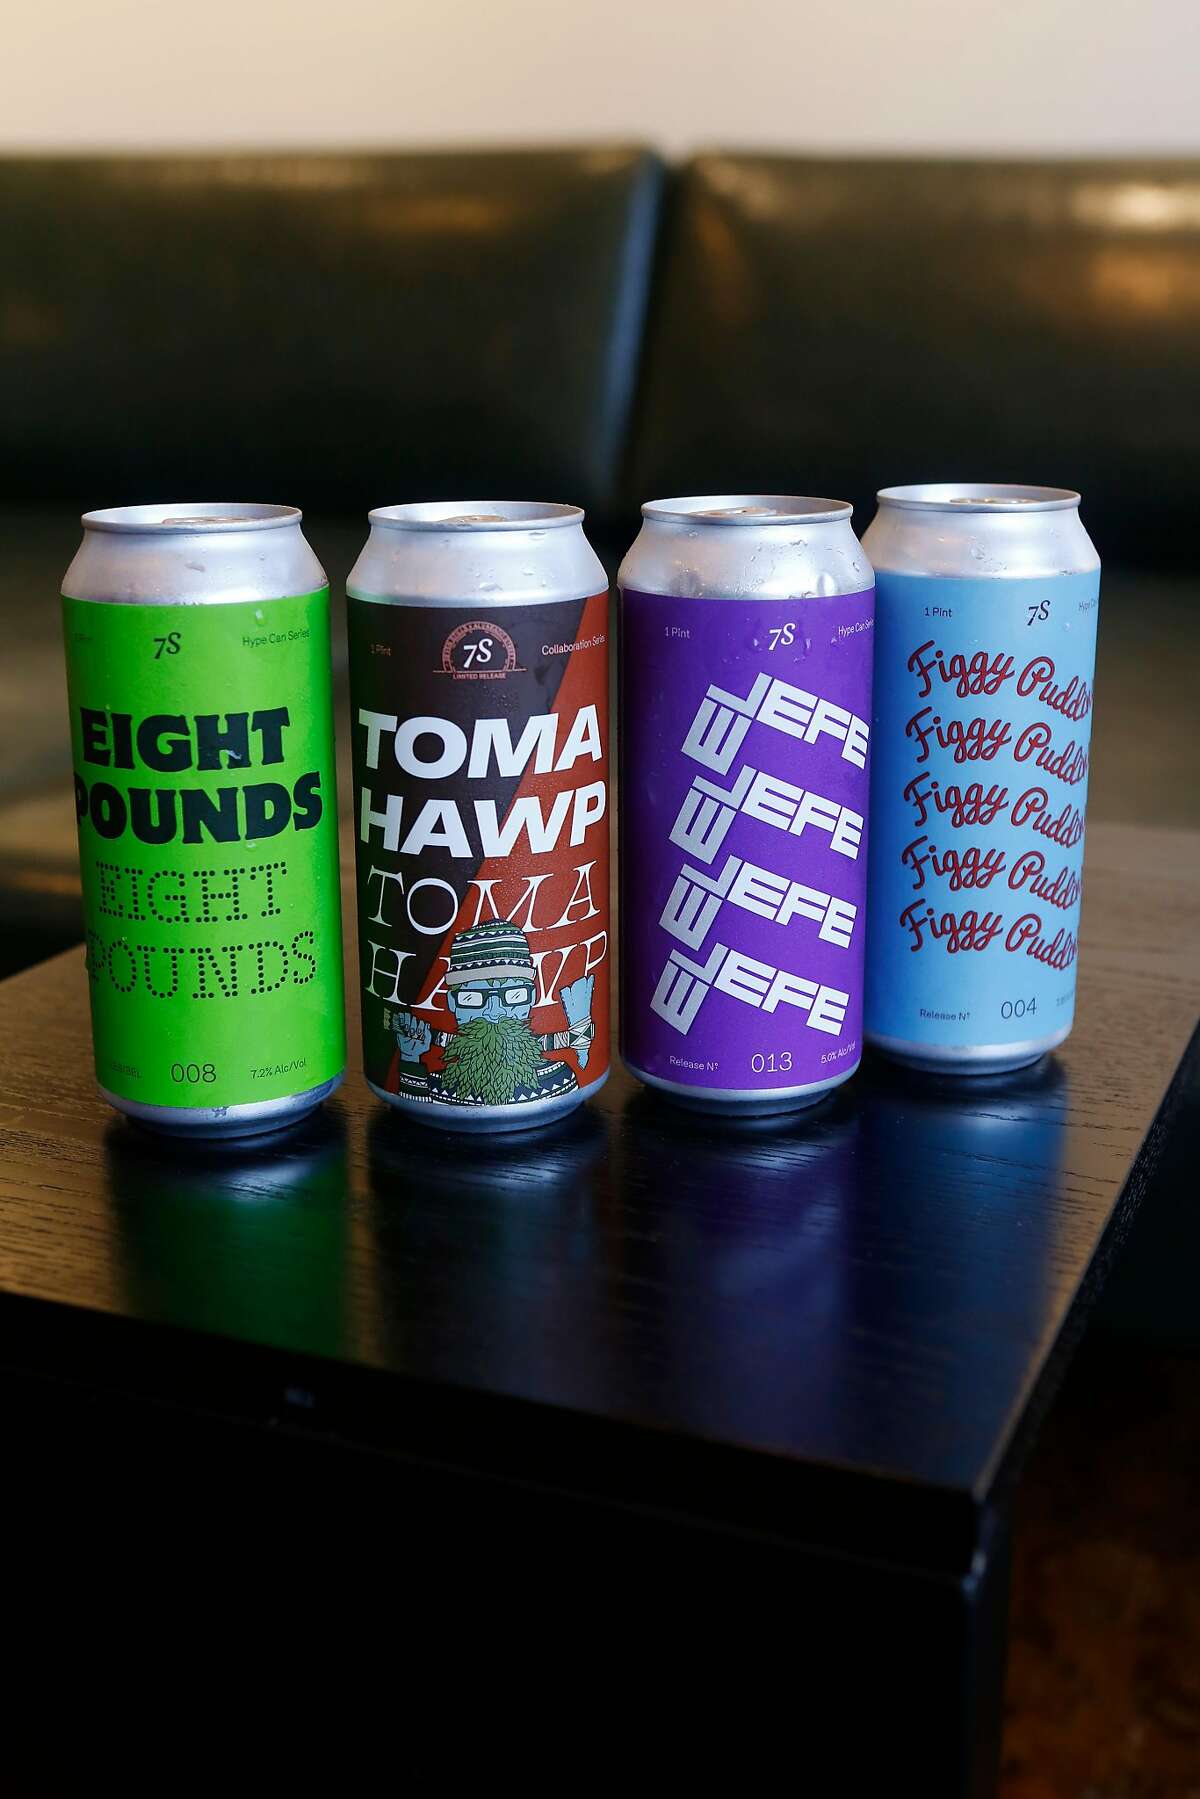 Beer cans Eight Pounds, Tomahawp, El Jefe, and Figgy Puddding at the Seven Stills Nob Hill bar located inside the Stanford Court Hotel on Thursday, June 21, 2018 in San Francisco, Calif.